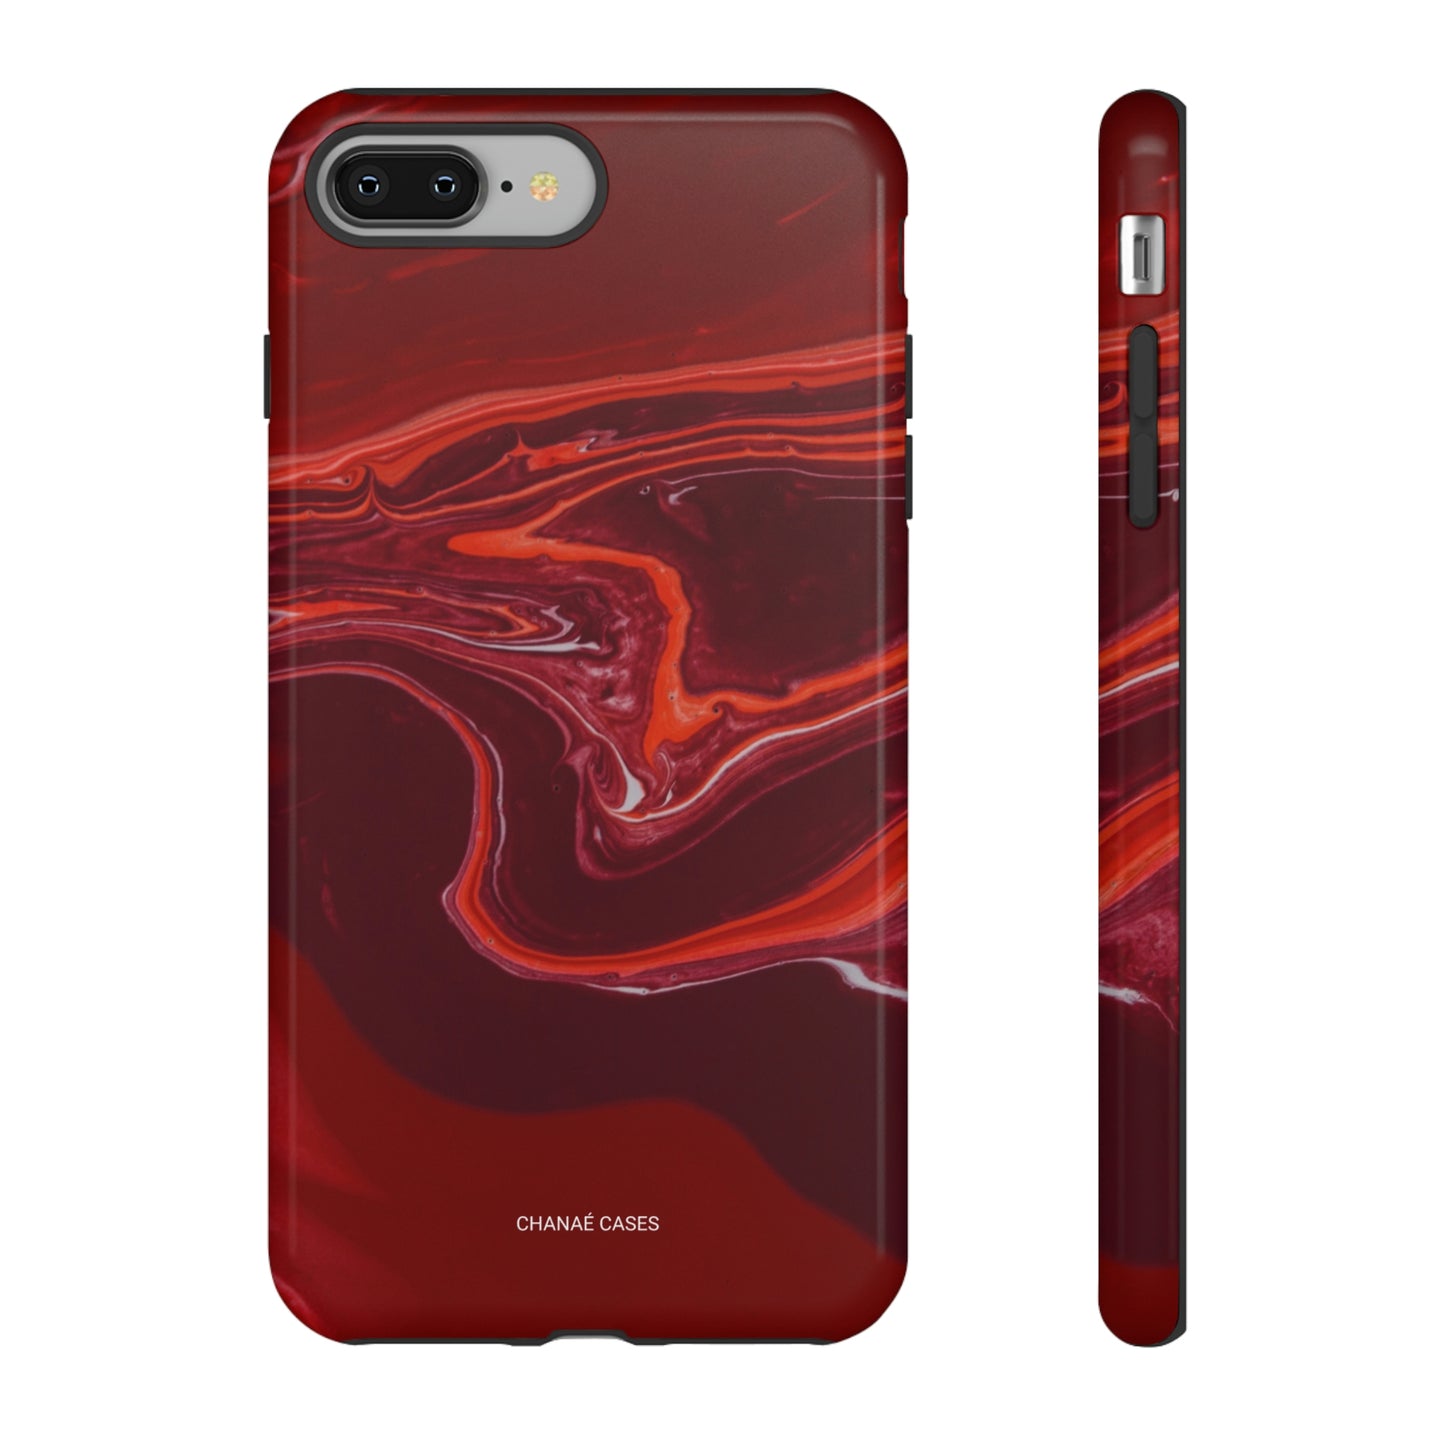 Sawyer iPhone "Tough" Case (Red)